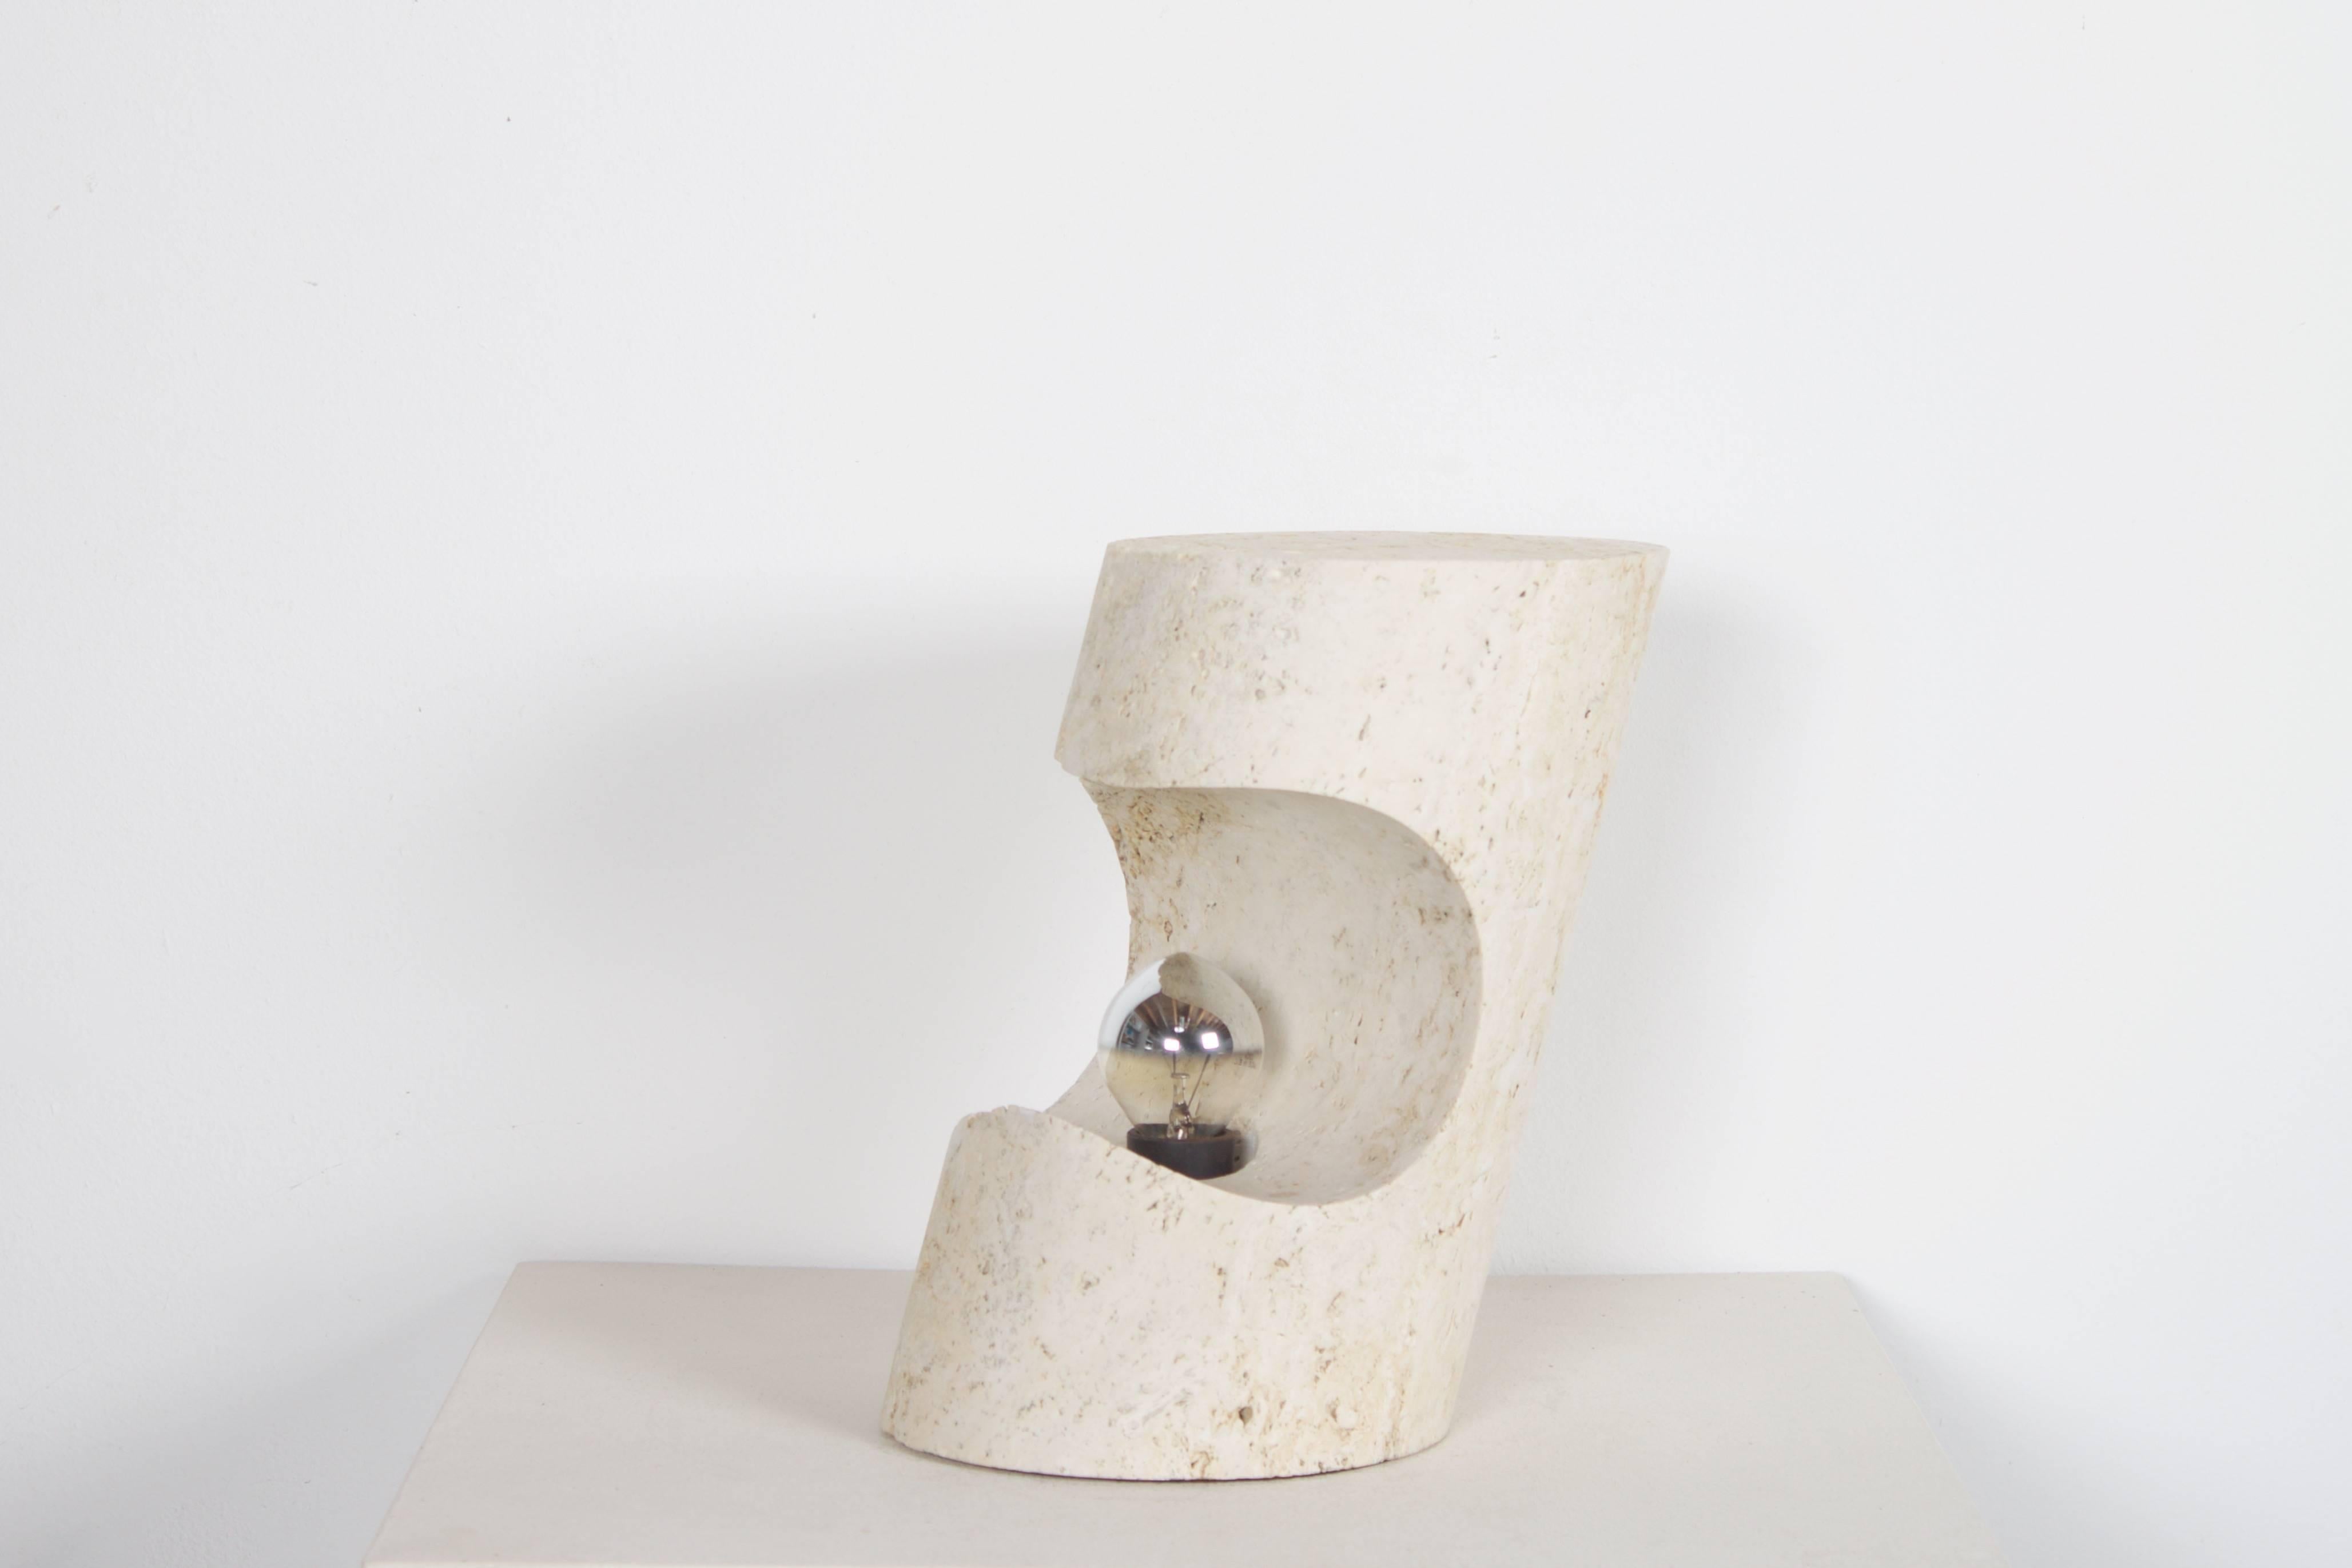 Beautiful table lamp by Giuliano Cesari for Nucleo, a division of the Sormani lamp company Milan, Italy.

Designed in 1971.

Made out of one piece of unfilled travertine.

Travertine has a characteristically aged look, Pits and holes, which speak to